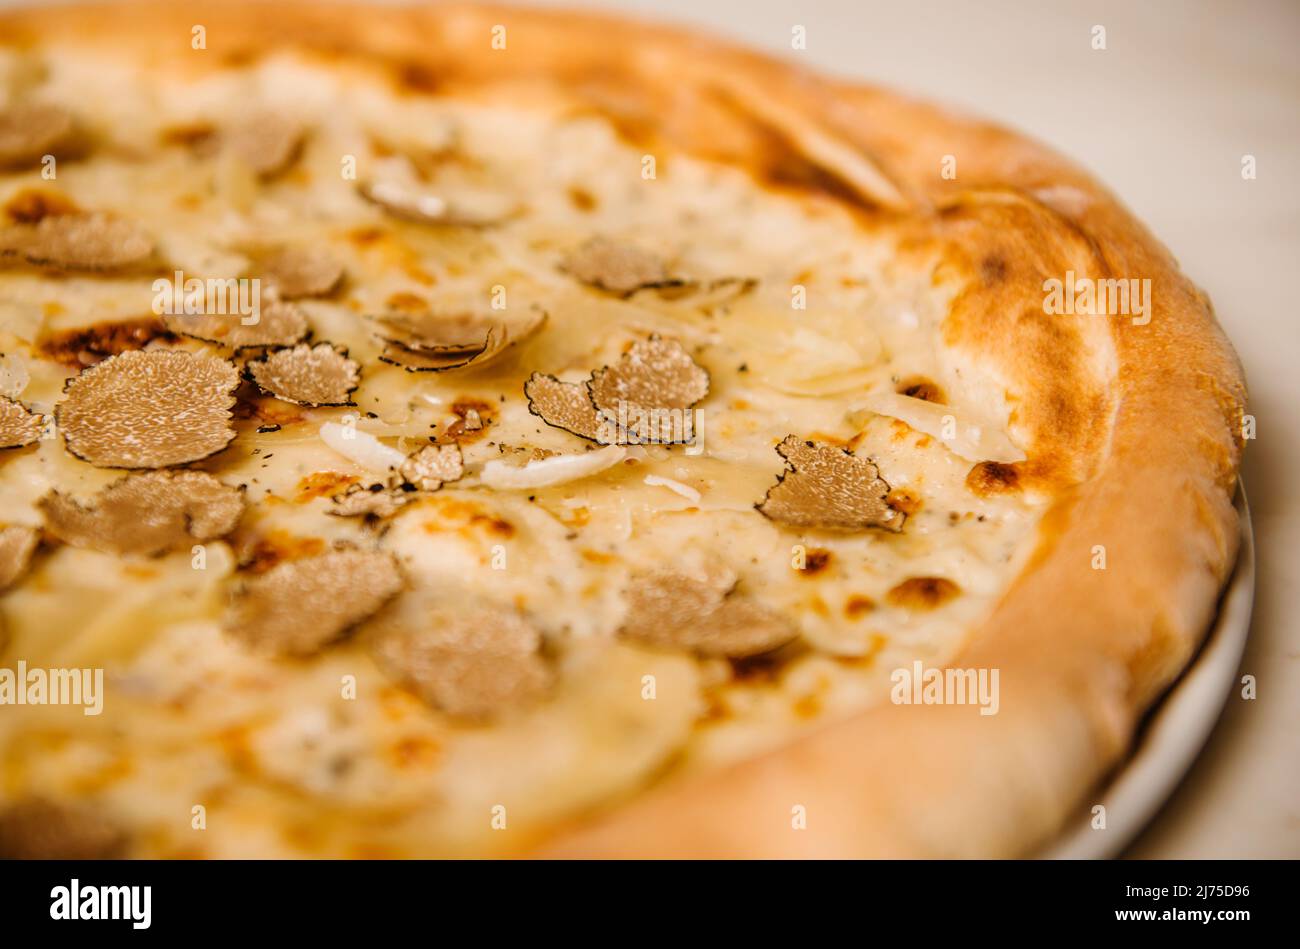 Black truffle pizza with béchamel sauce and italian cheeses Stock Photo